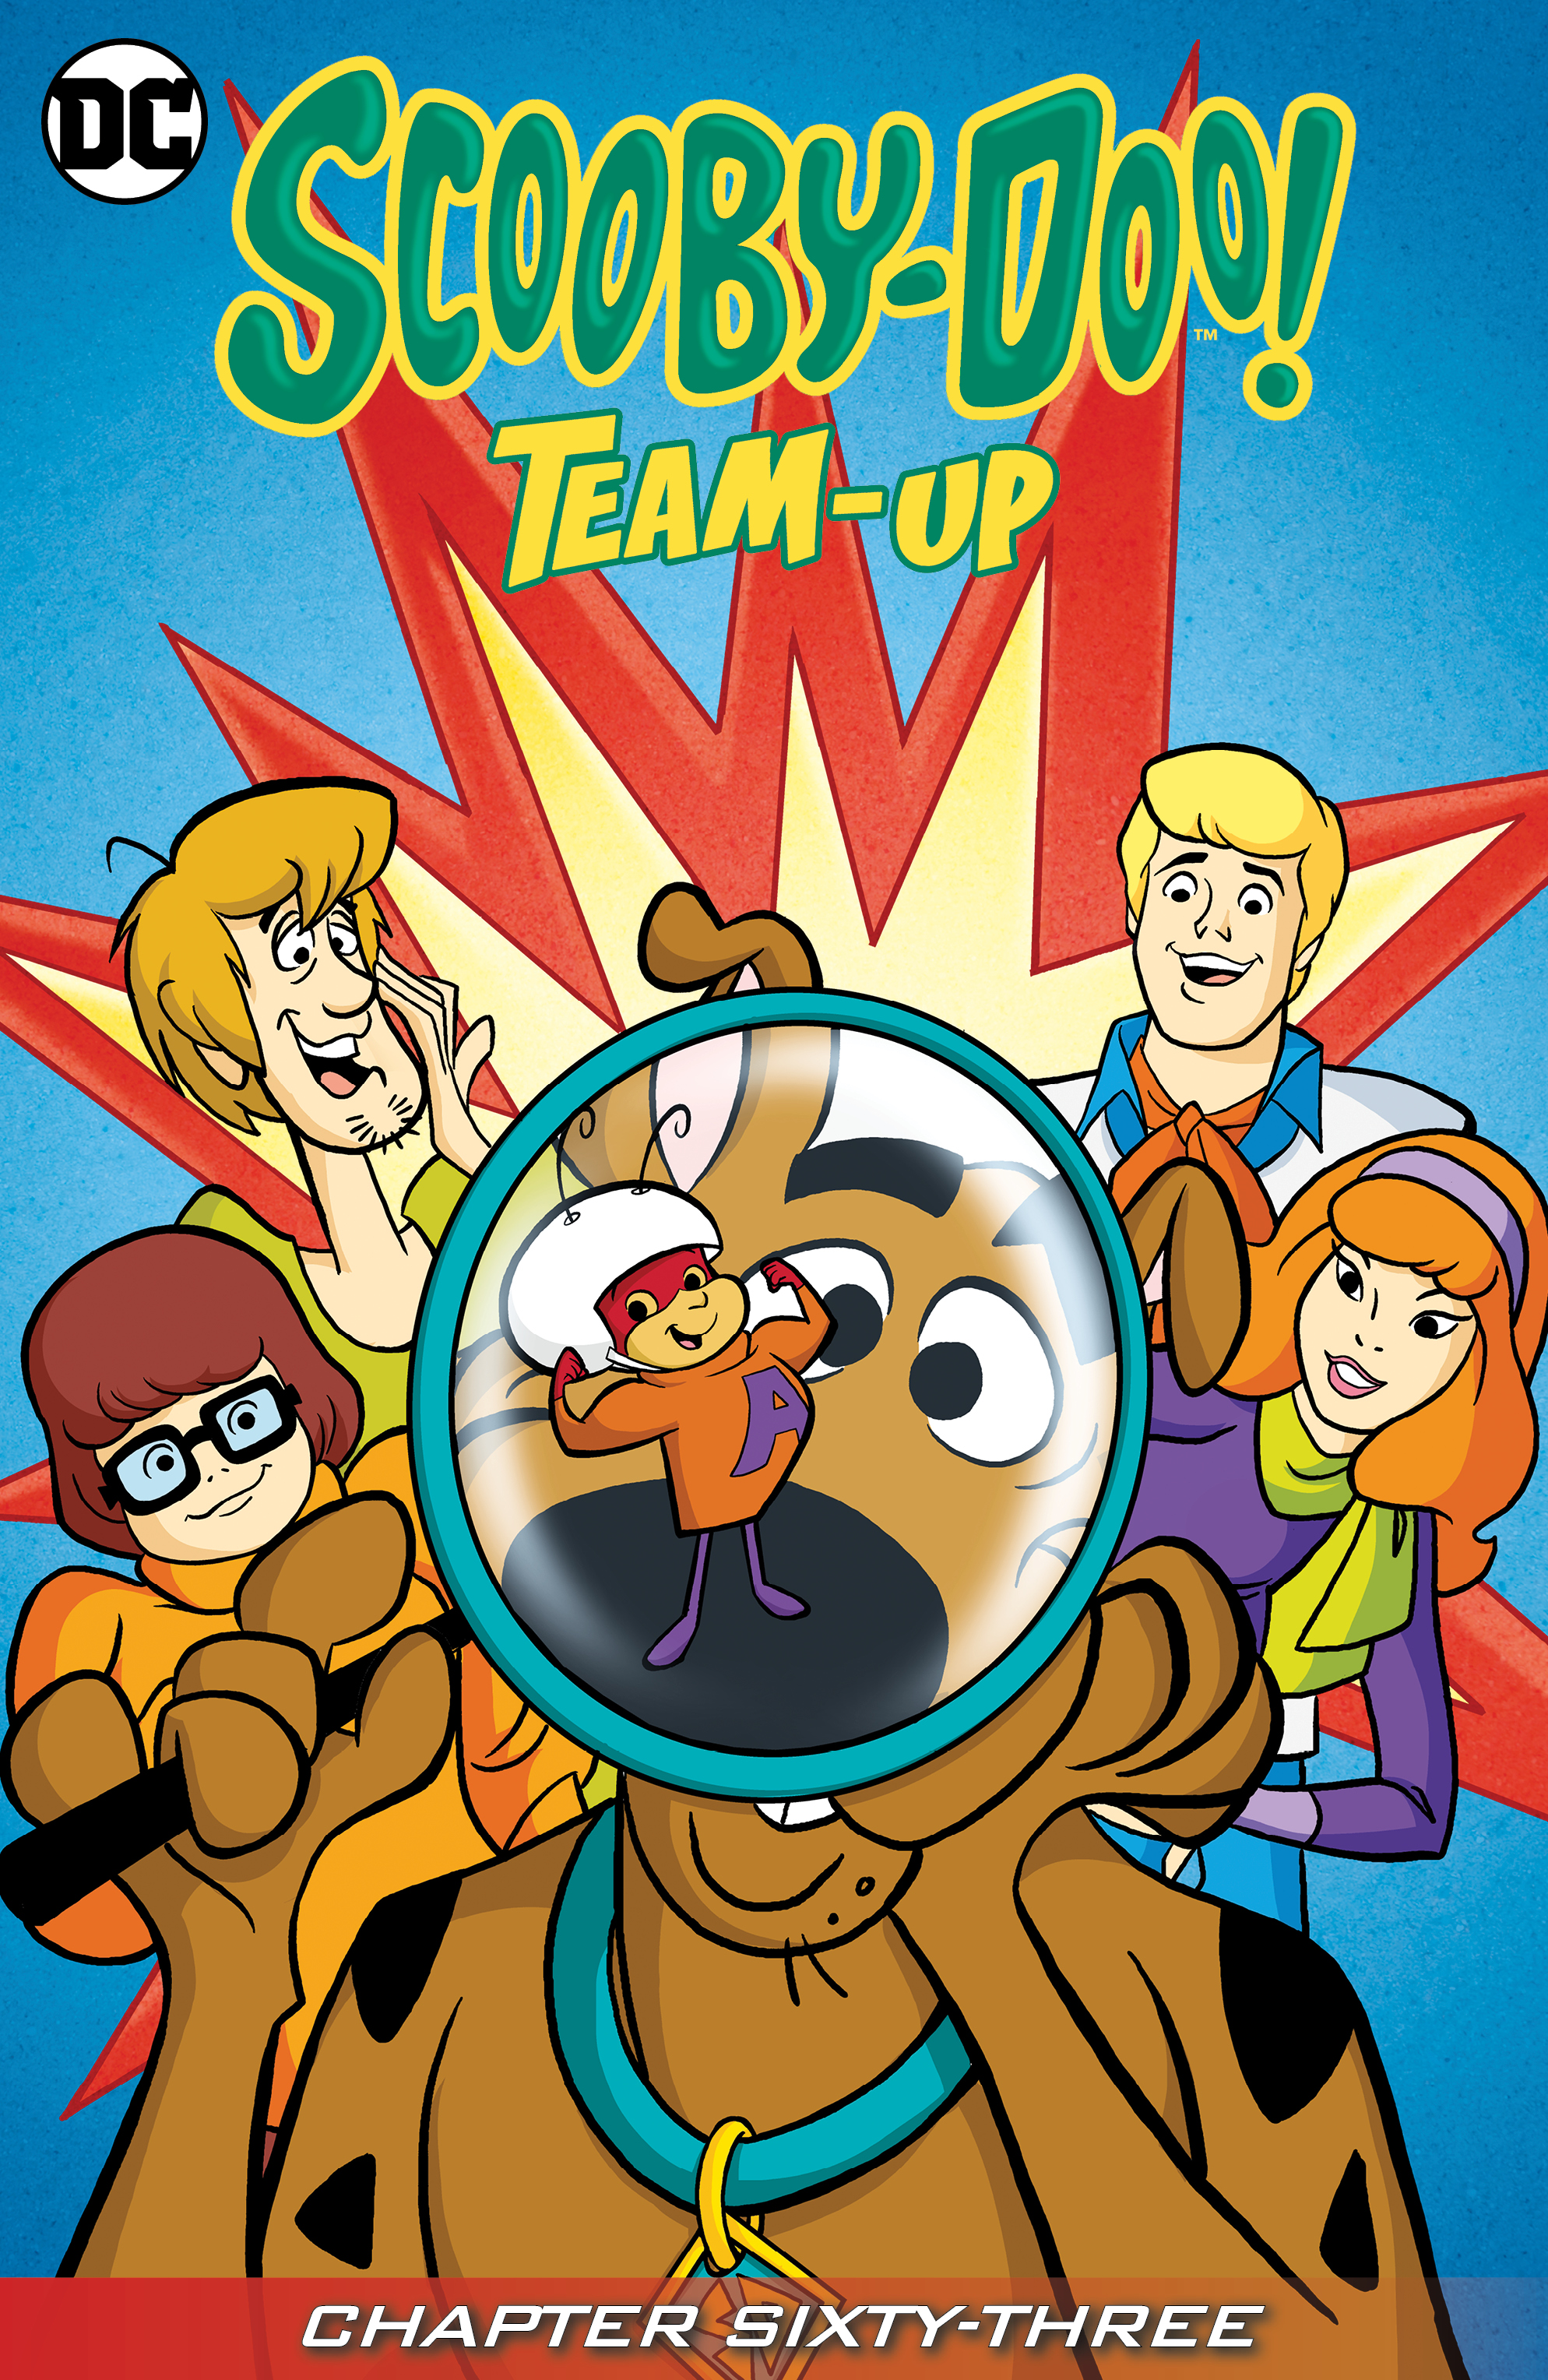 Scooby-Doo Team-Up #63 preview images